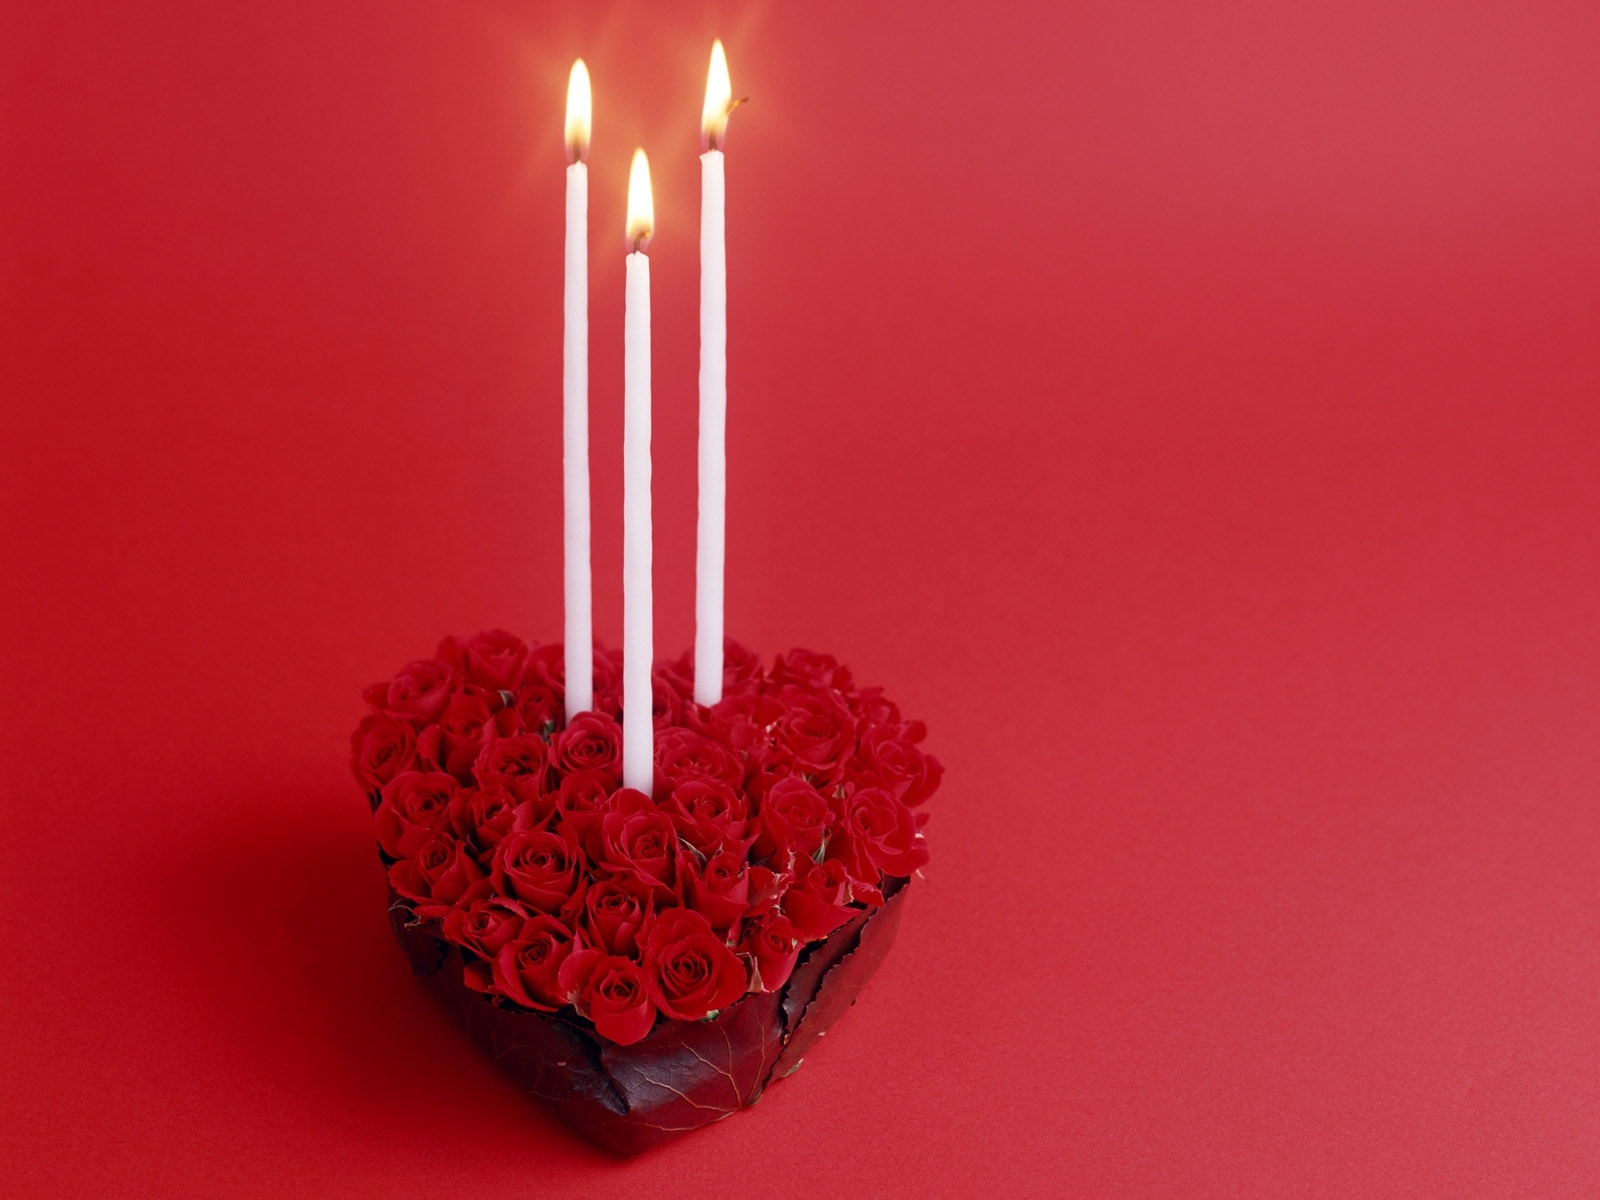 Desktop FHD valentine's day, holidays, roses, hearts, candles, postcards, red